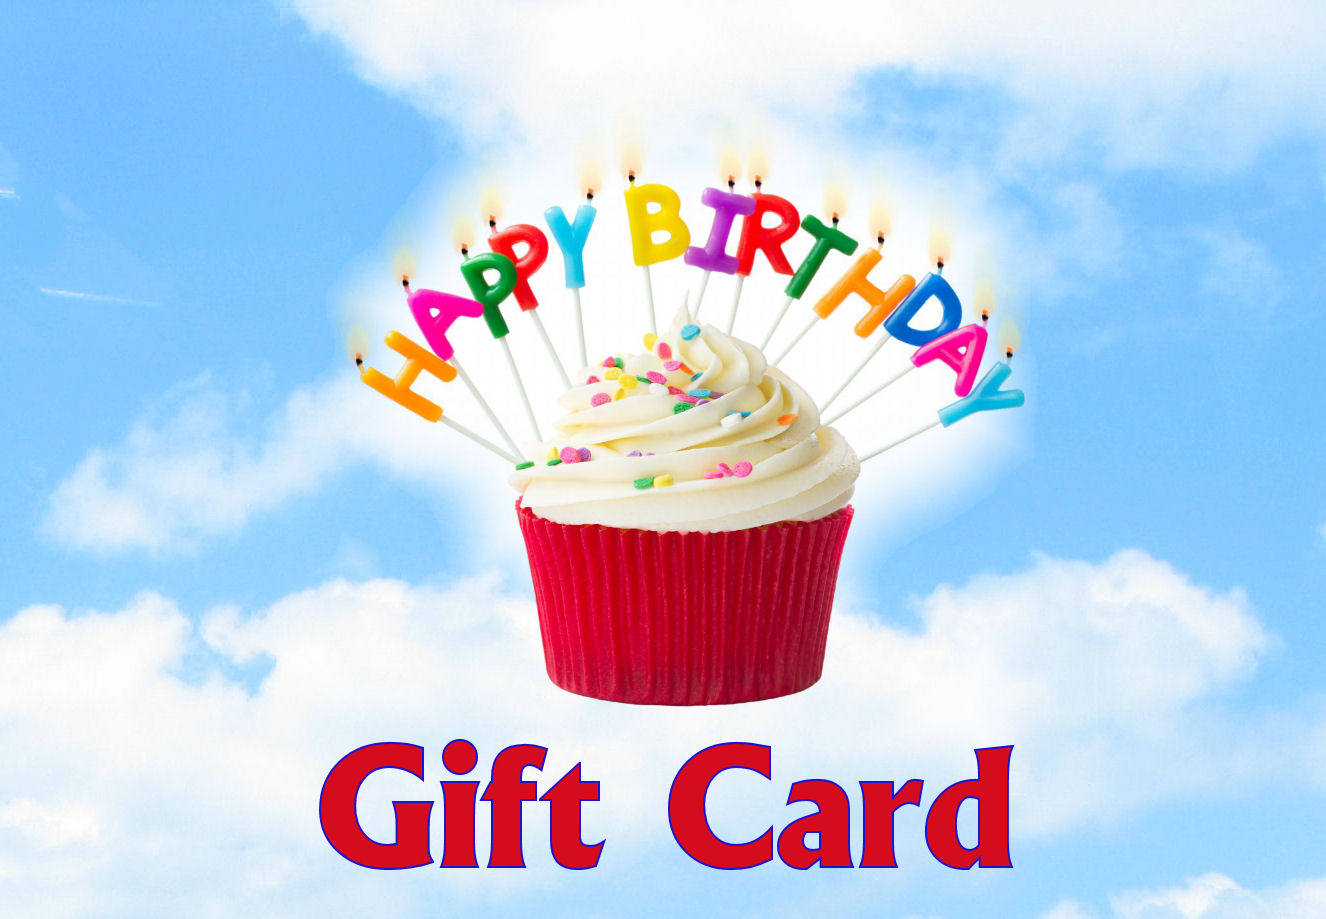 Blue Sky in background, a red and white cupcake with colorful candles that spell out Happy Birthday in the middle and Gift card written along the bottom